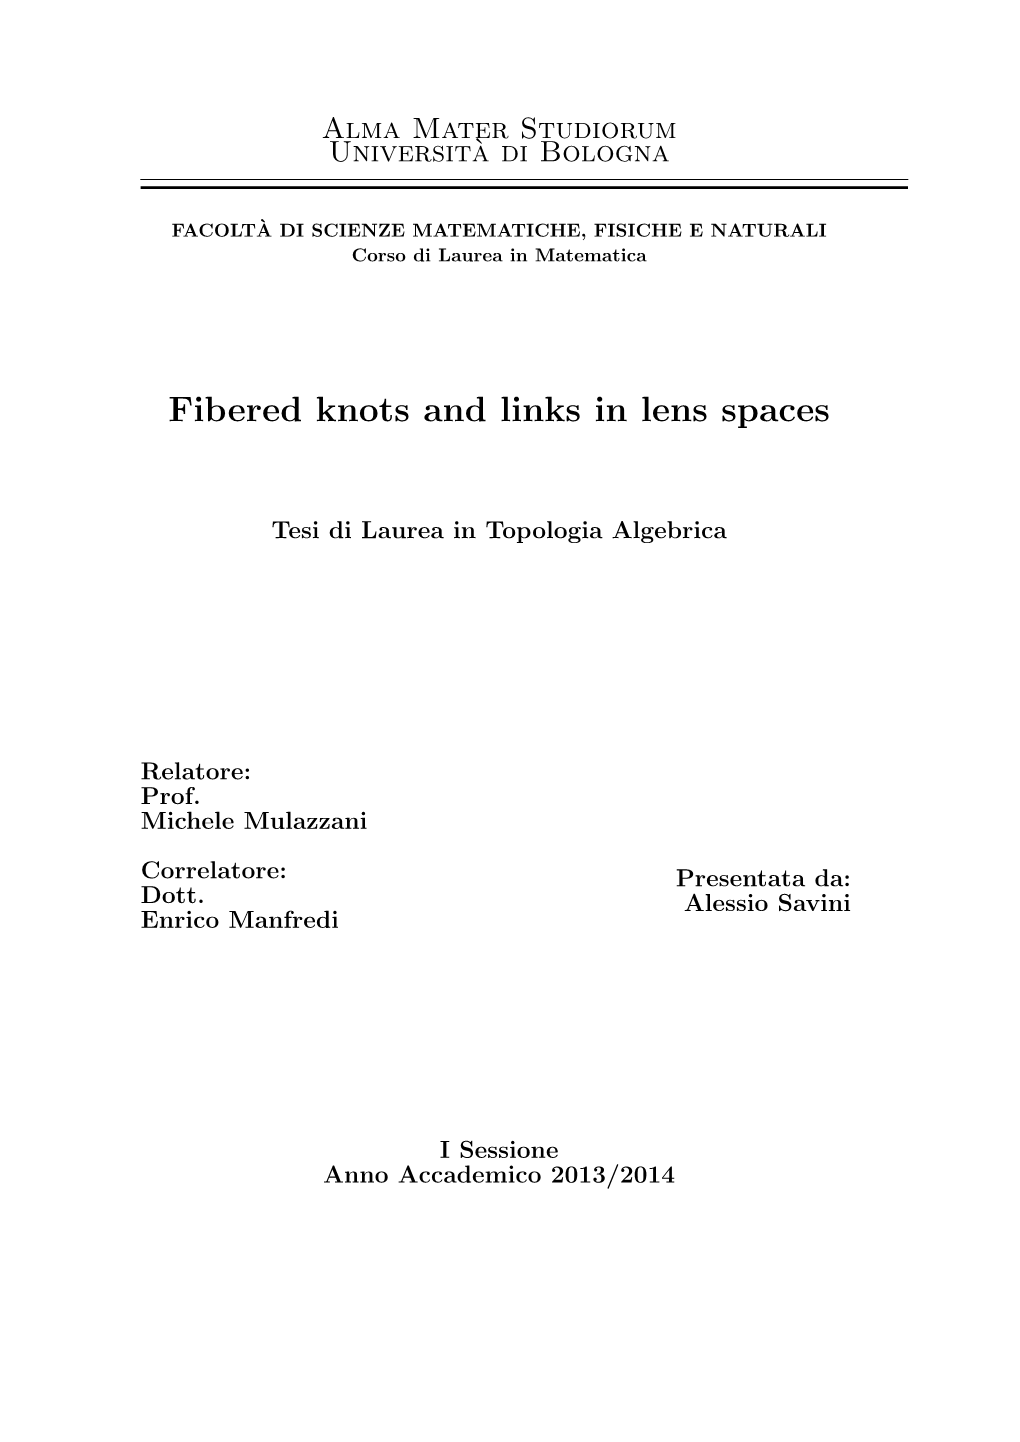 Fibered Knots and Links in Lens Spaces